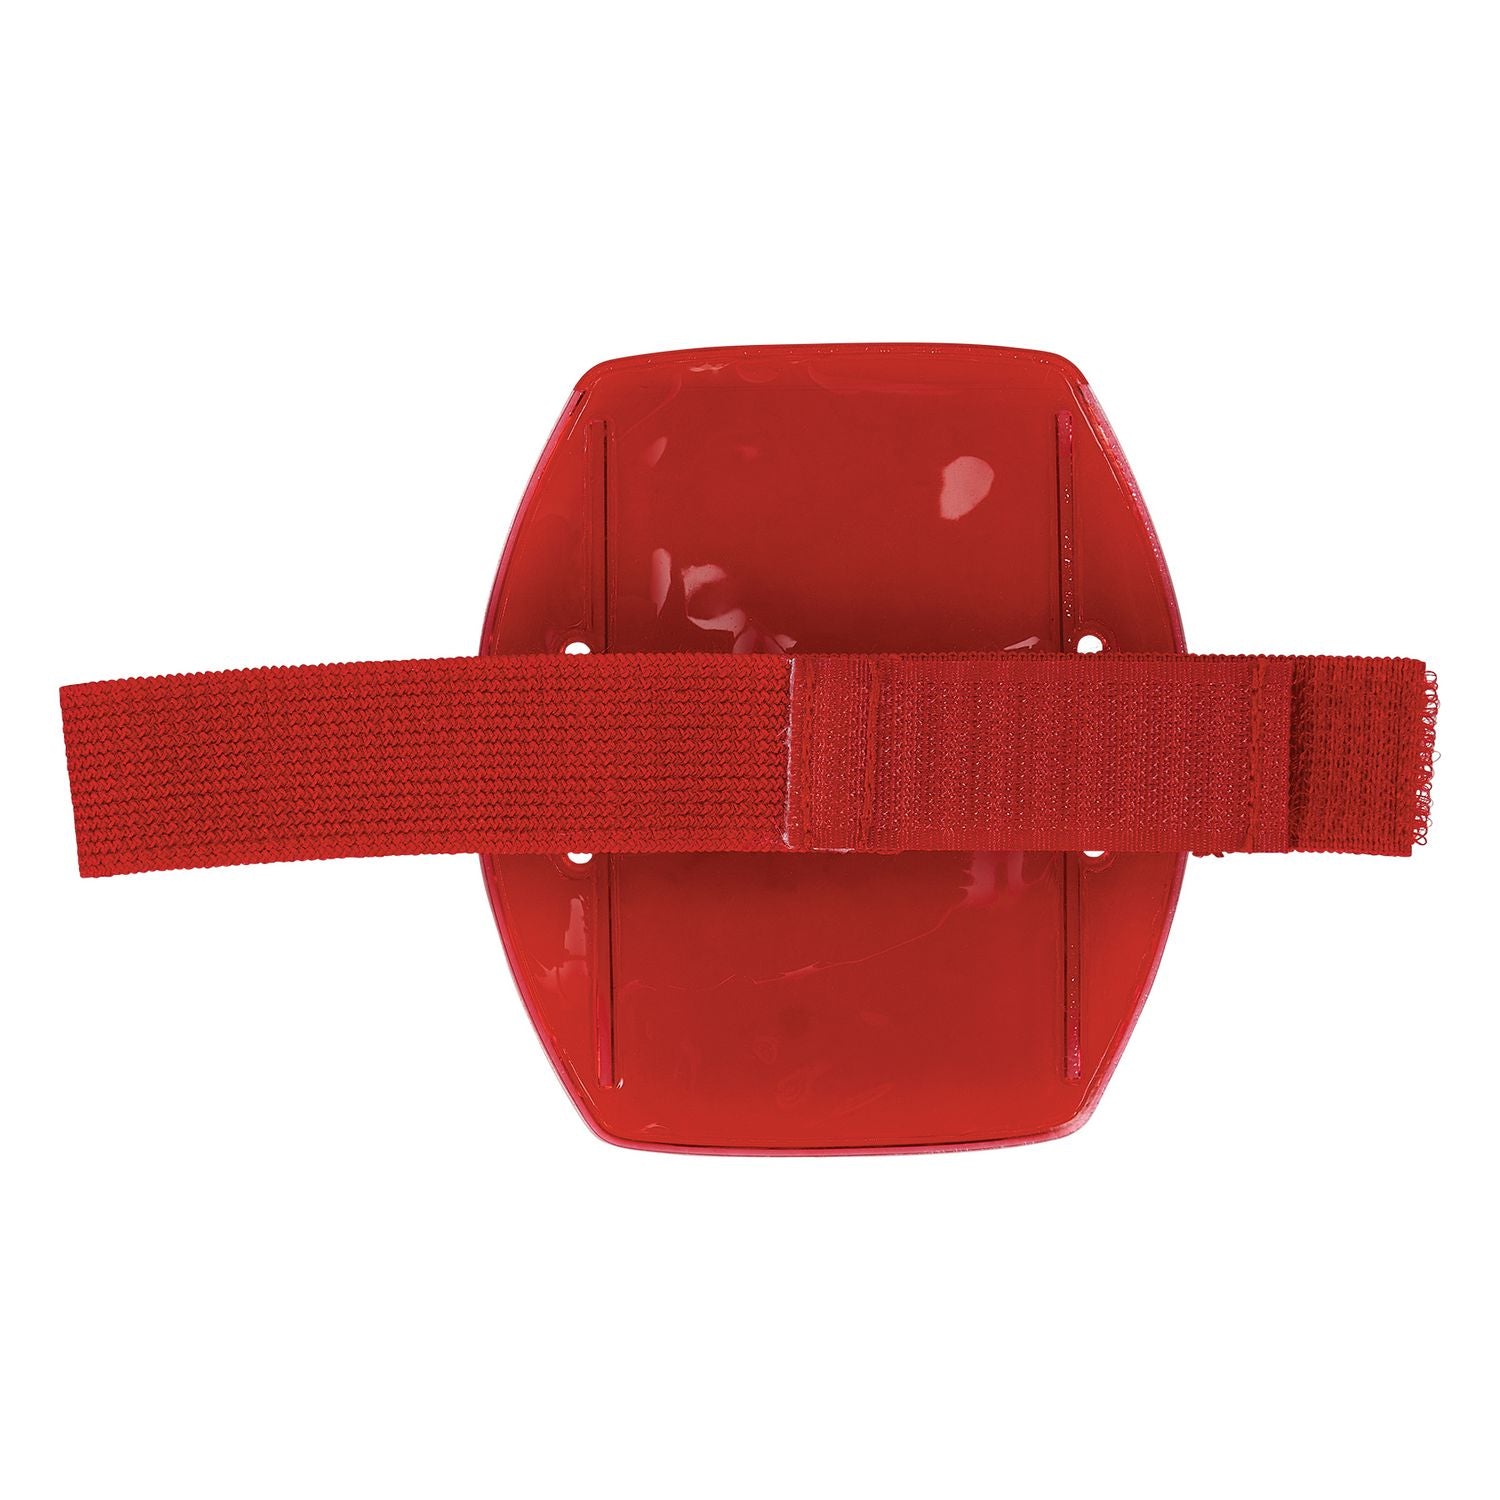 squids-3386-arm-band-id-badge-holder-vertical-red-375-x-425-holder-25-x-4-insert-10-pack-ships-in-1-3-business-days_ego19969 - 2